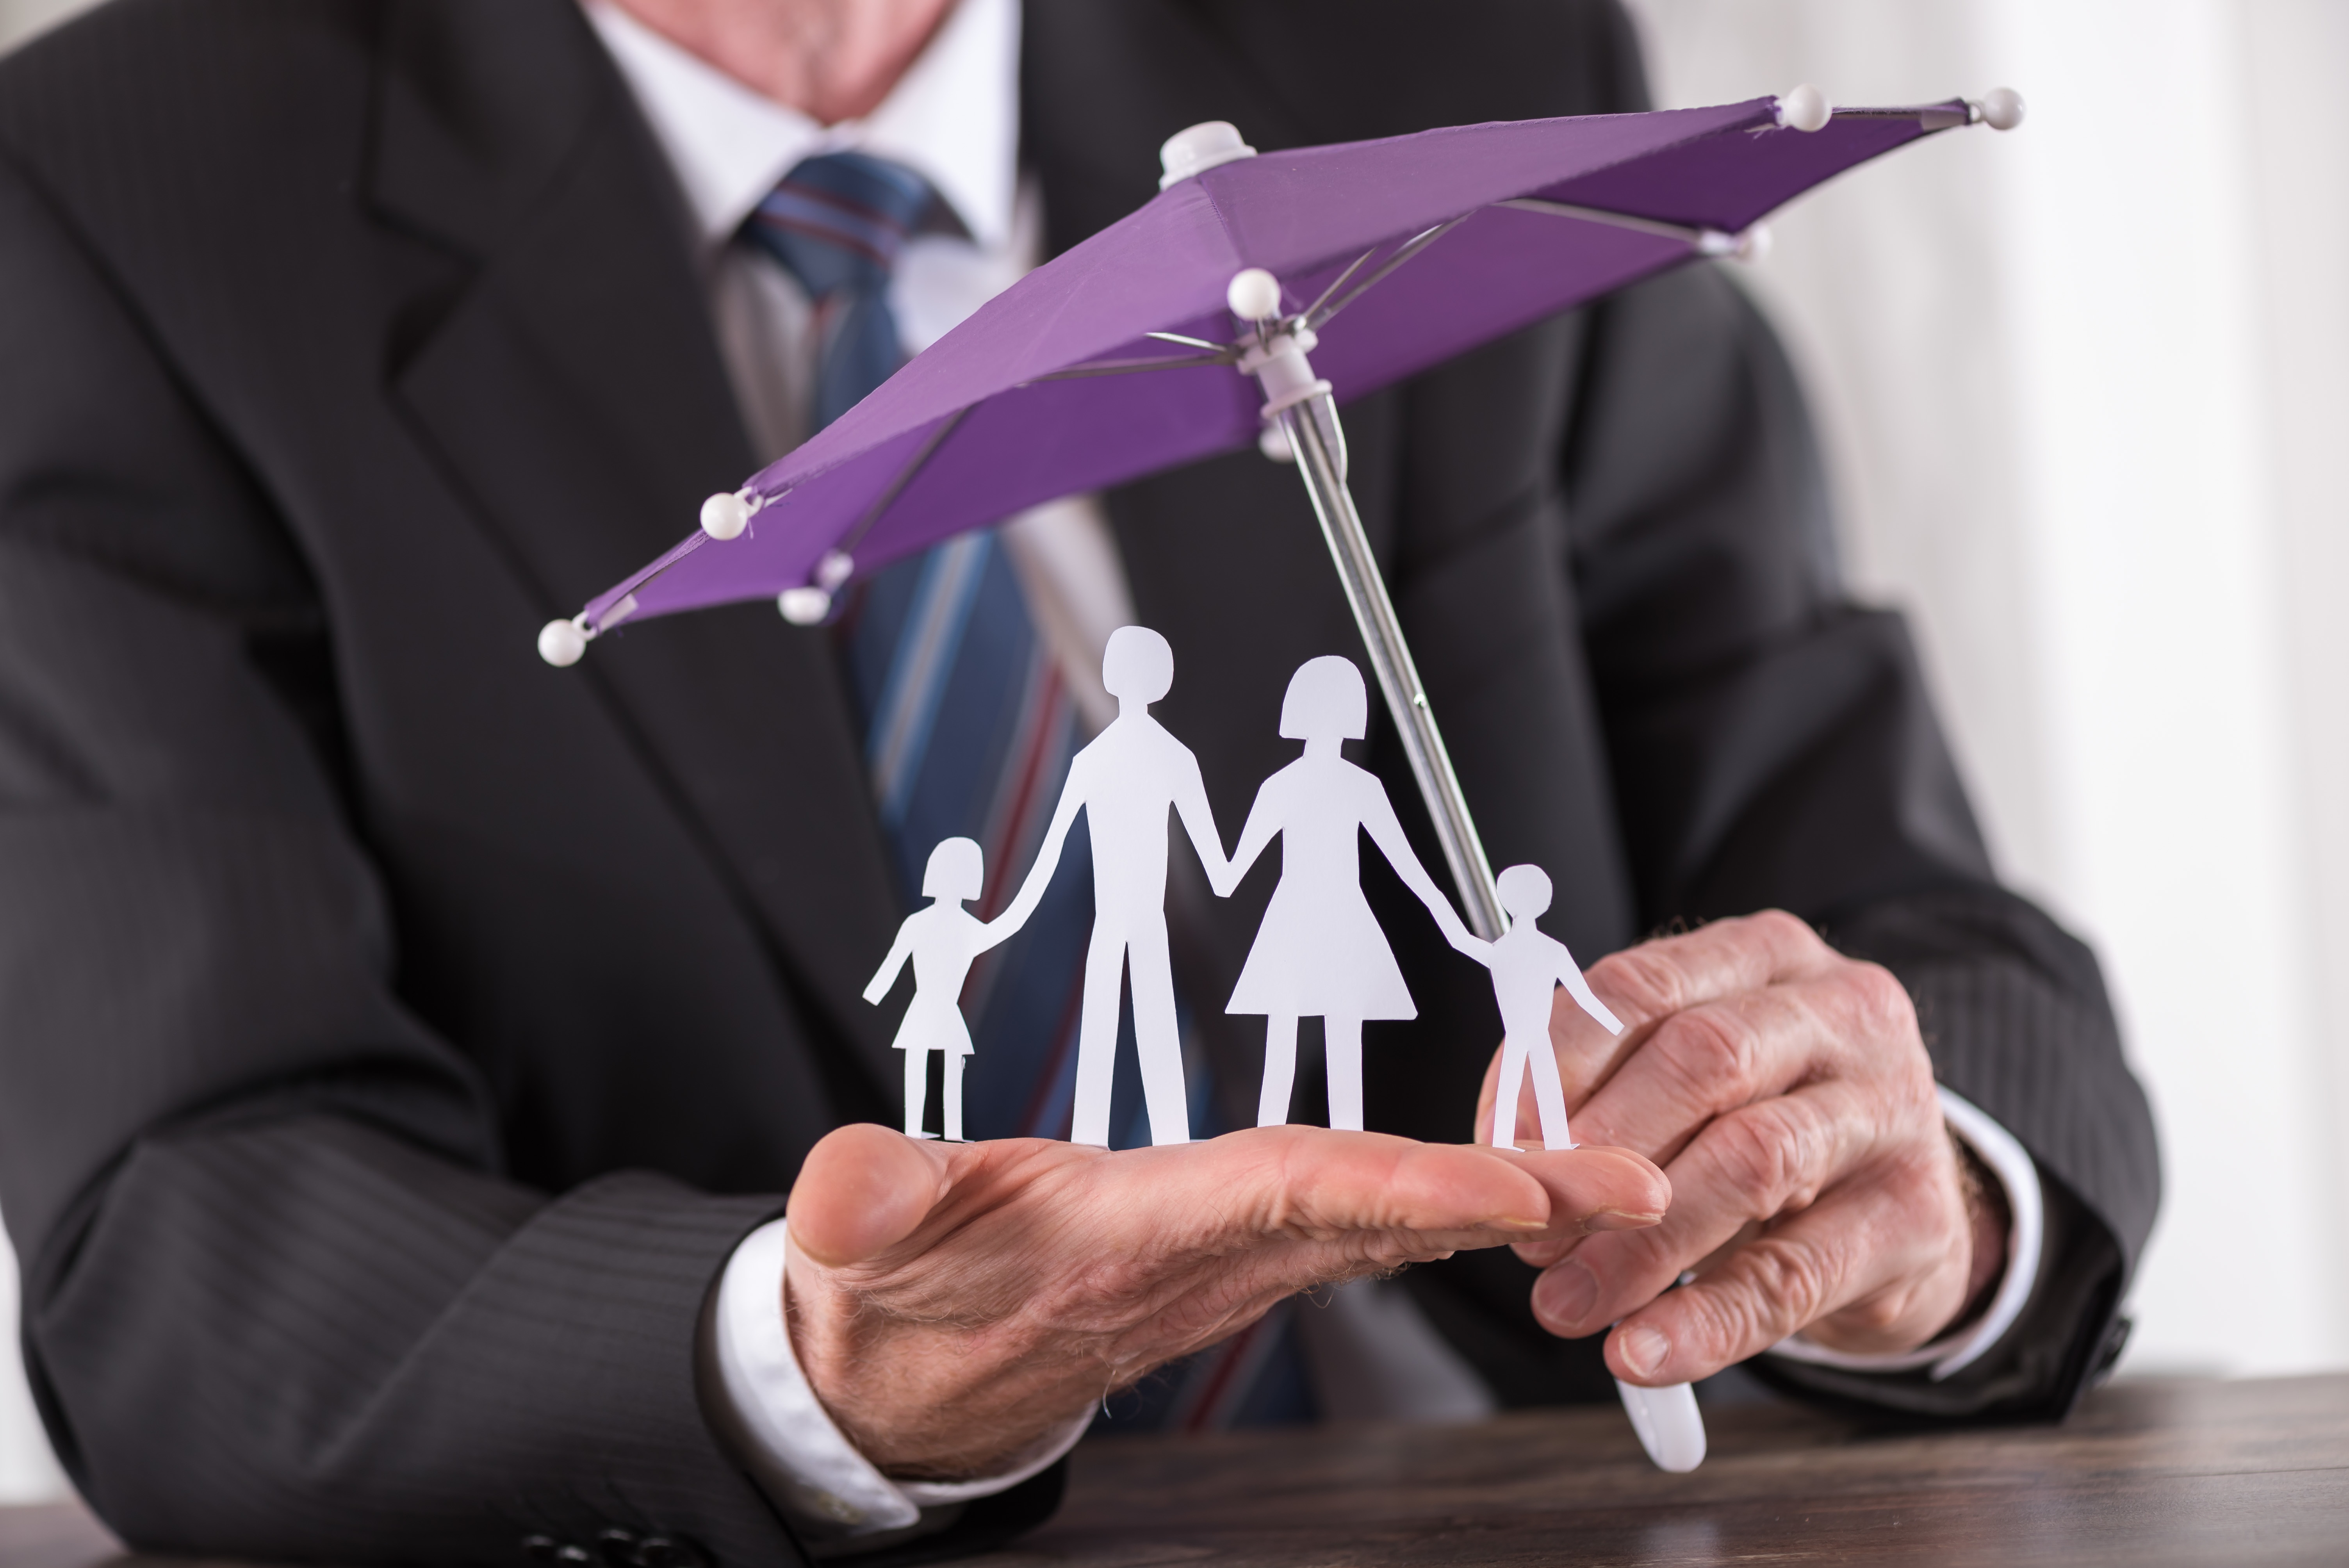 When Do You Need Life Insurance Coverage?